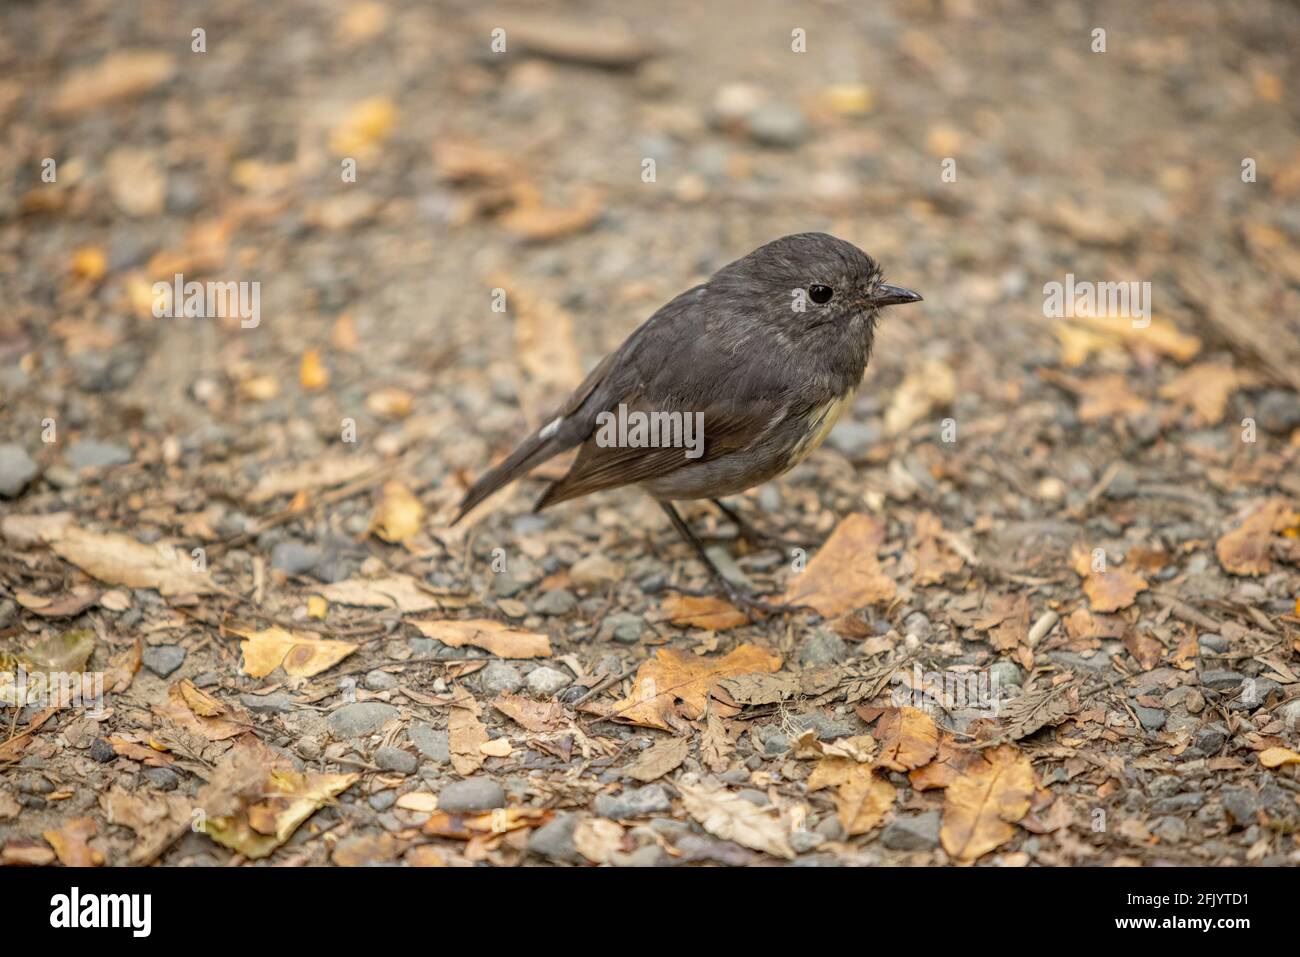 South Island Robin or Toutouwai, an Endemic New Zealand Forest bird sitting on the Forest Floor, South Island New Zealand Stock Photo